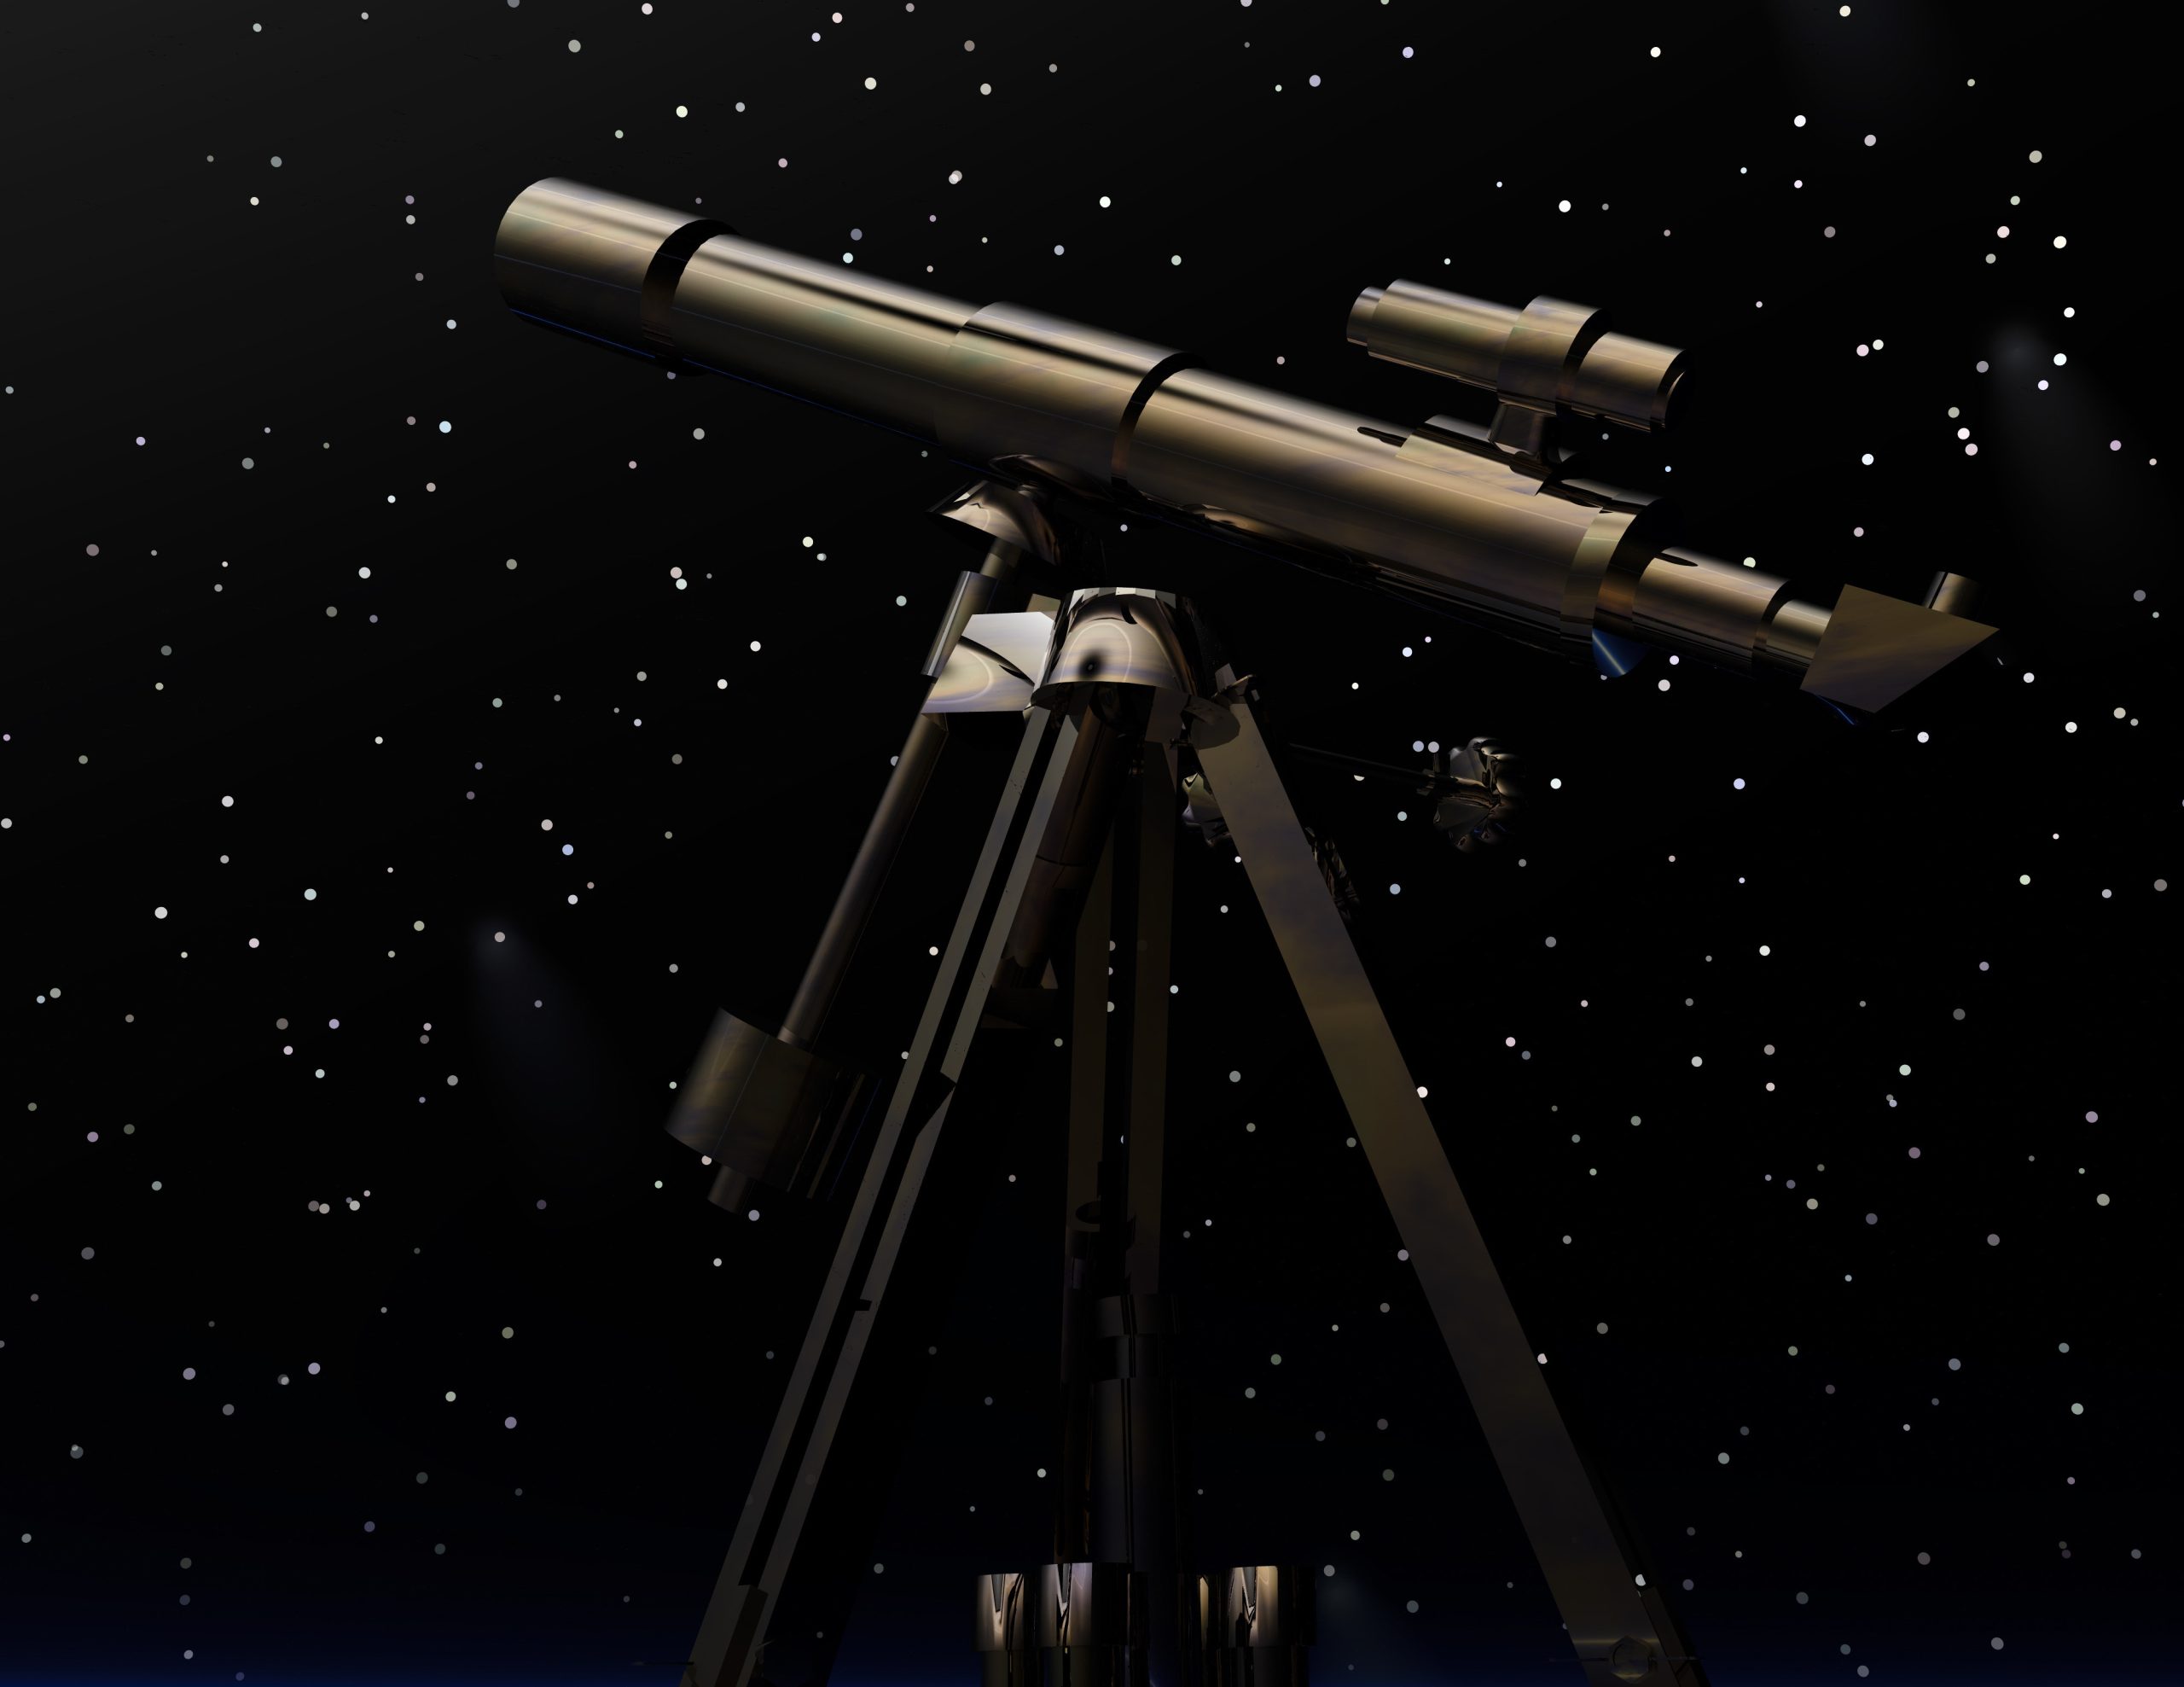 Guest Post: Which End of the Telescope Do You Use?